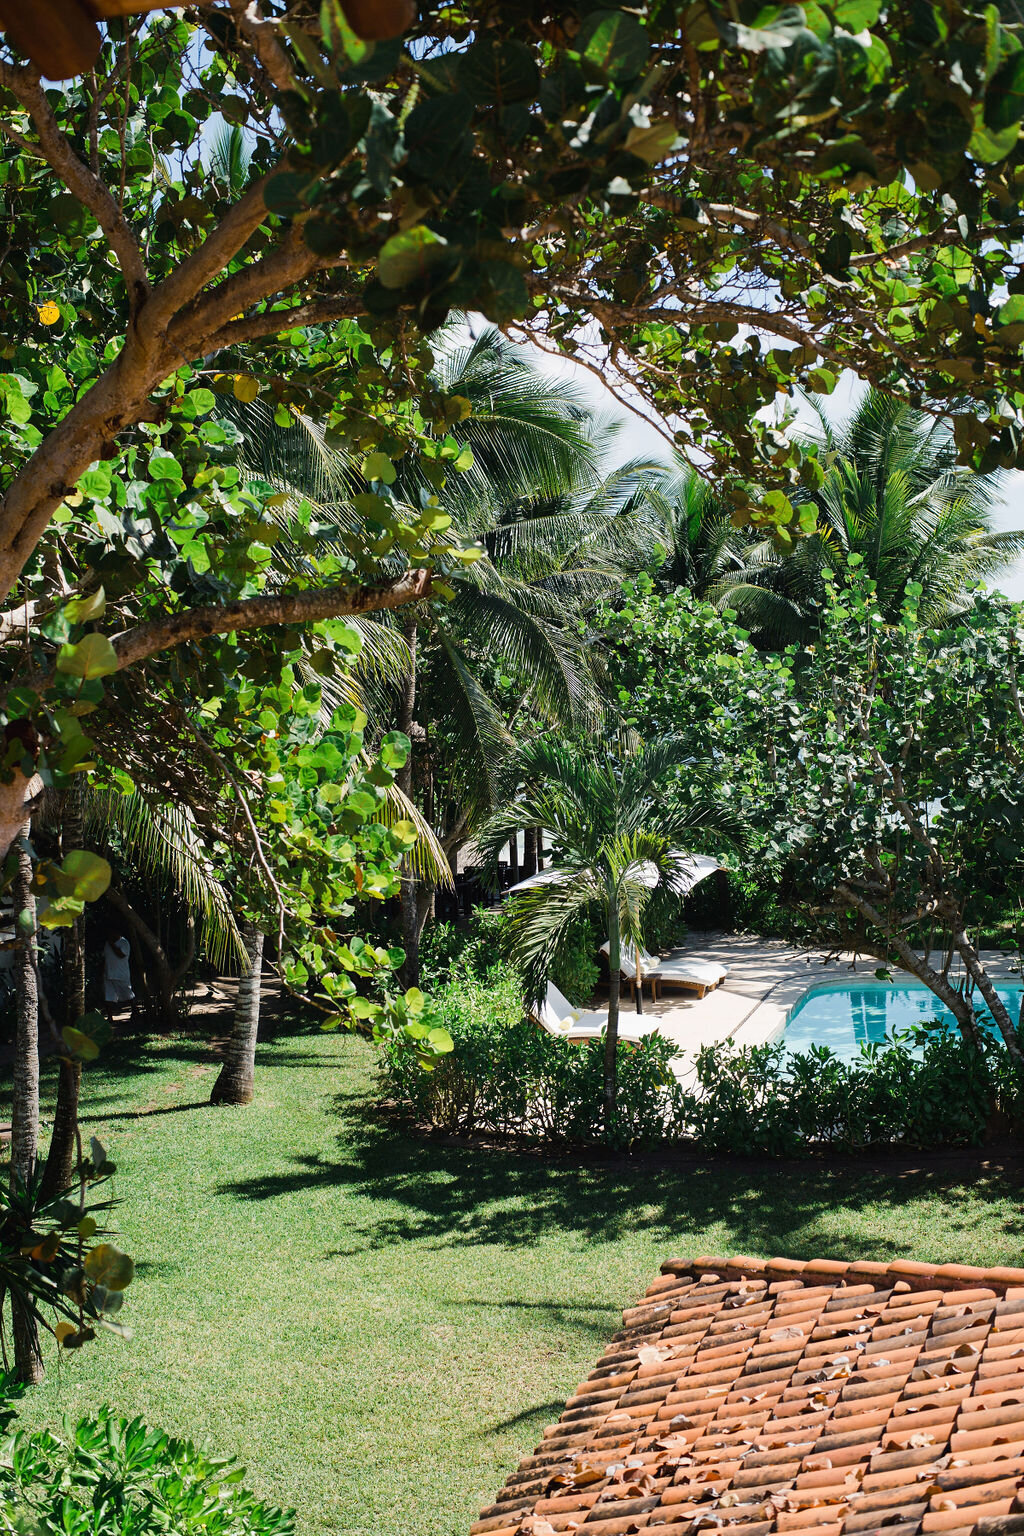 View of the pool amongst lush trees and greenery at Hotel Esencia, Tulum, Mexico